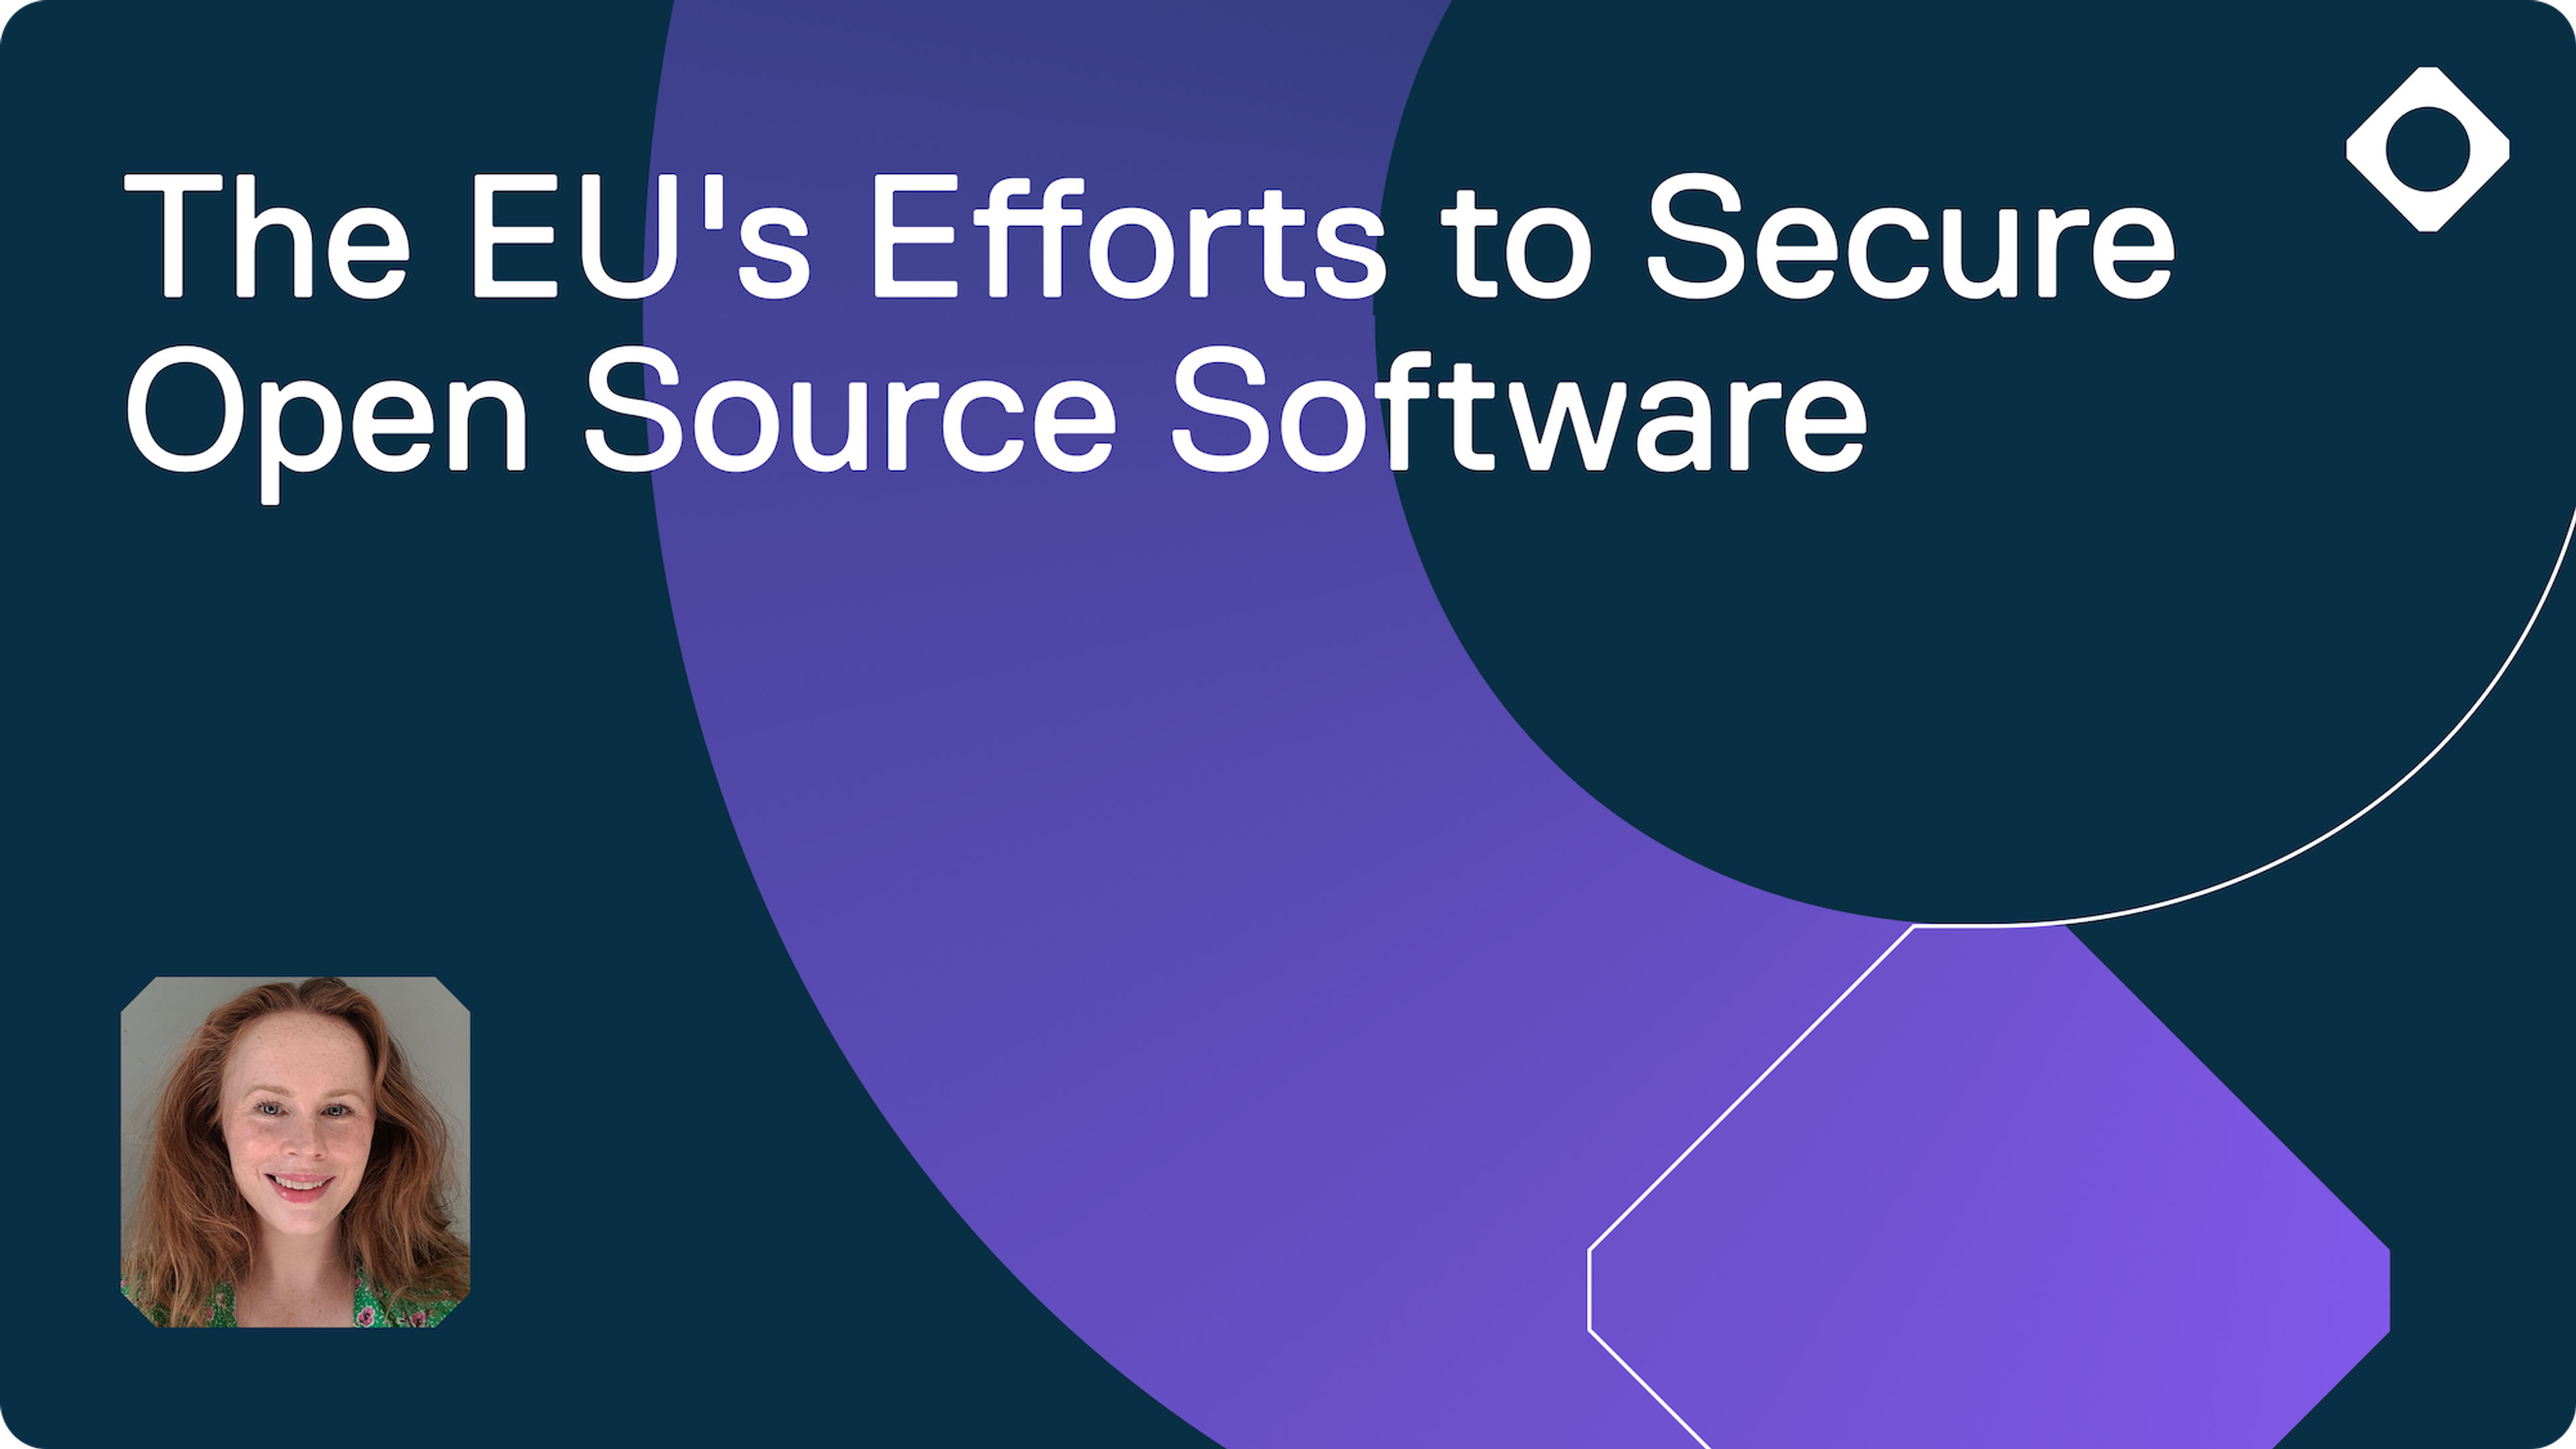 The EU's Efforts to Secure Open Source Software